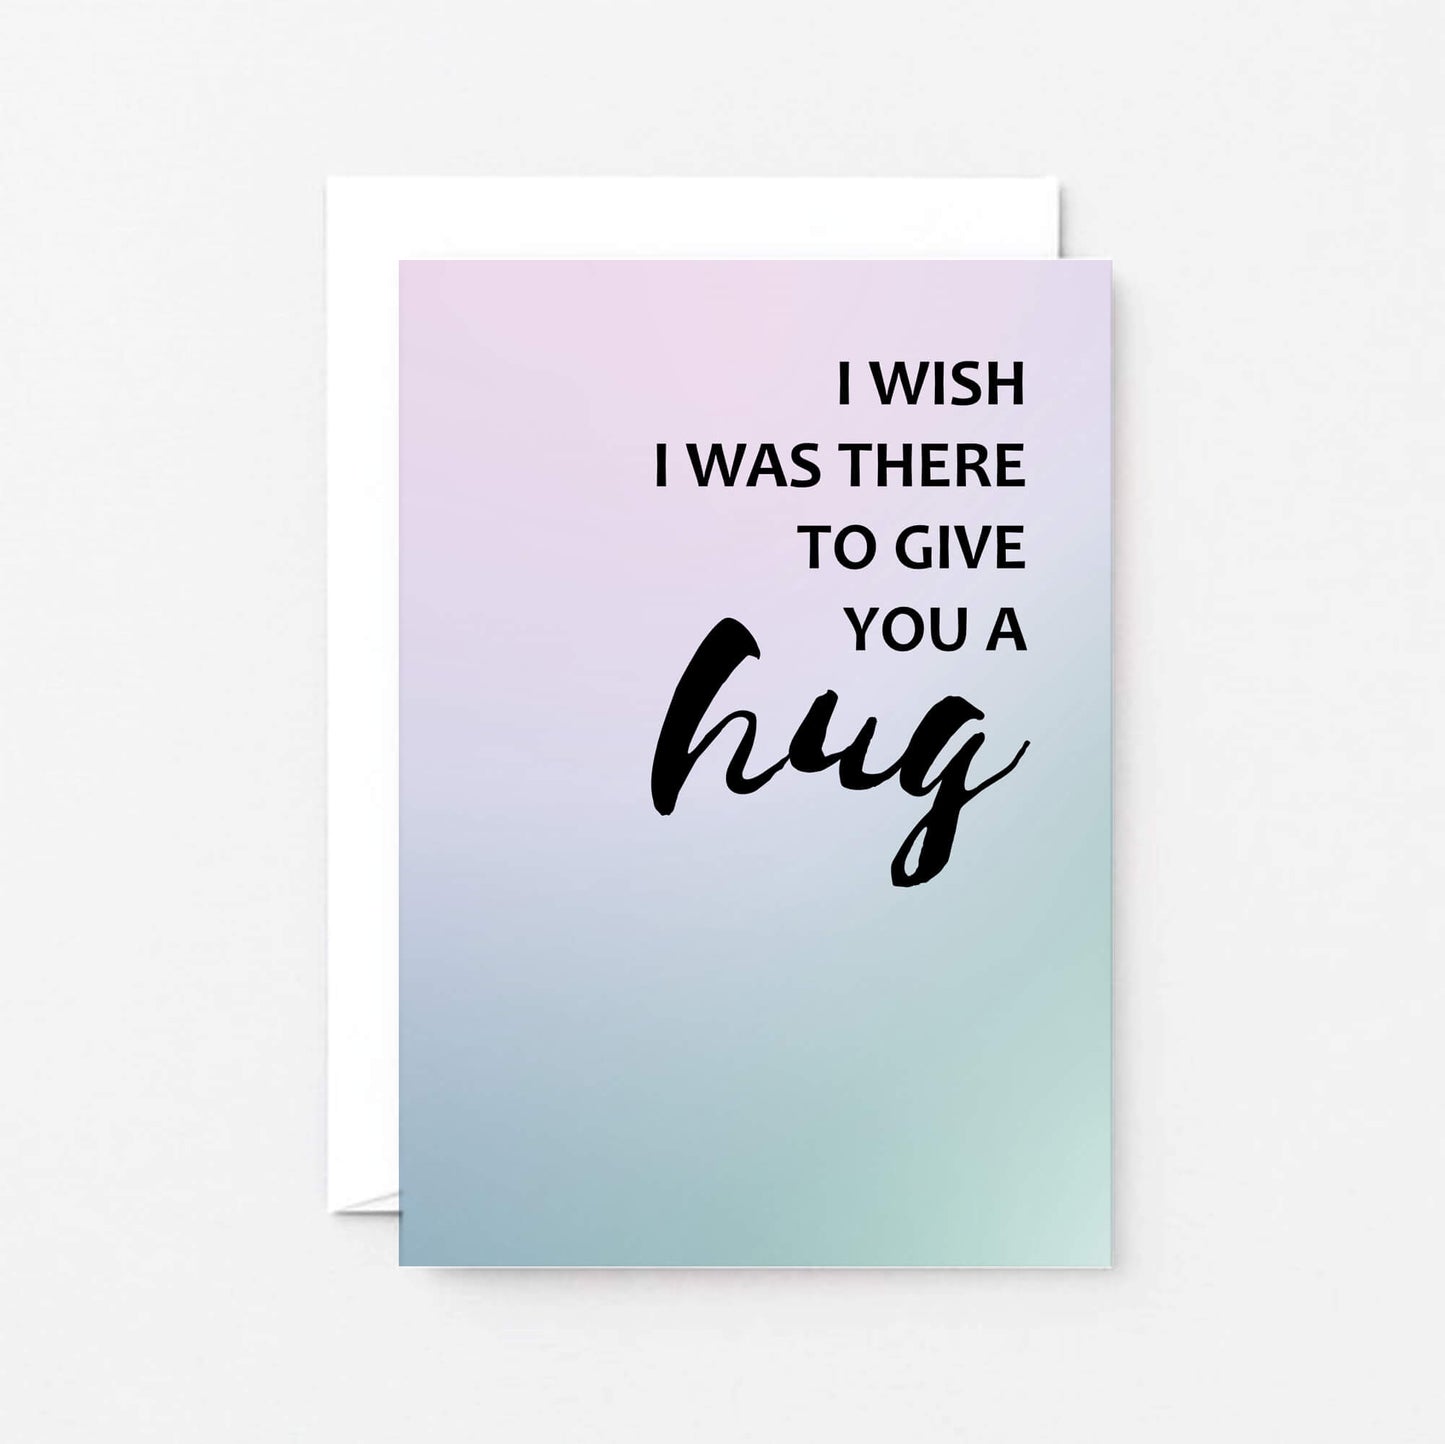 Send A Hug Card by SixElevenCreations. Reads I wish I was there to give you a hug. Product Code SE3033A6